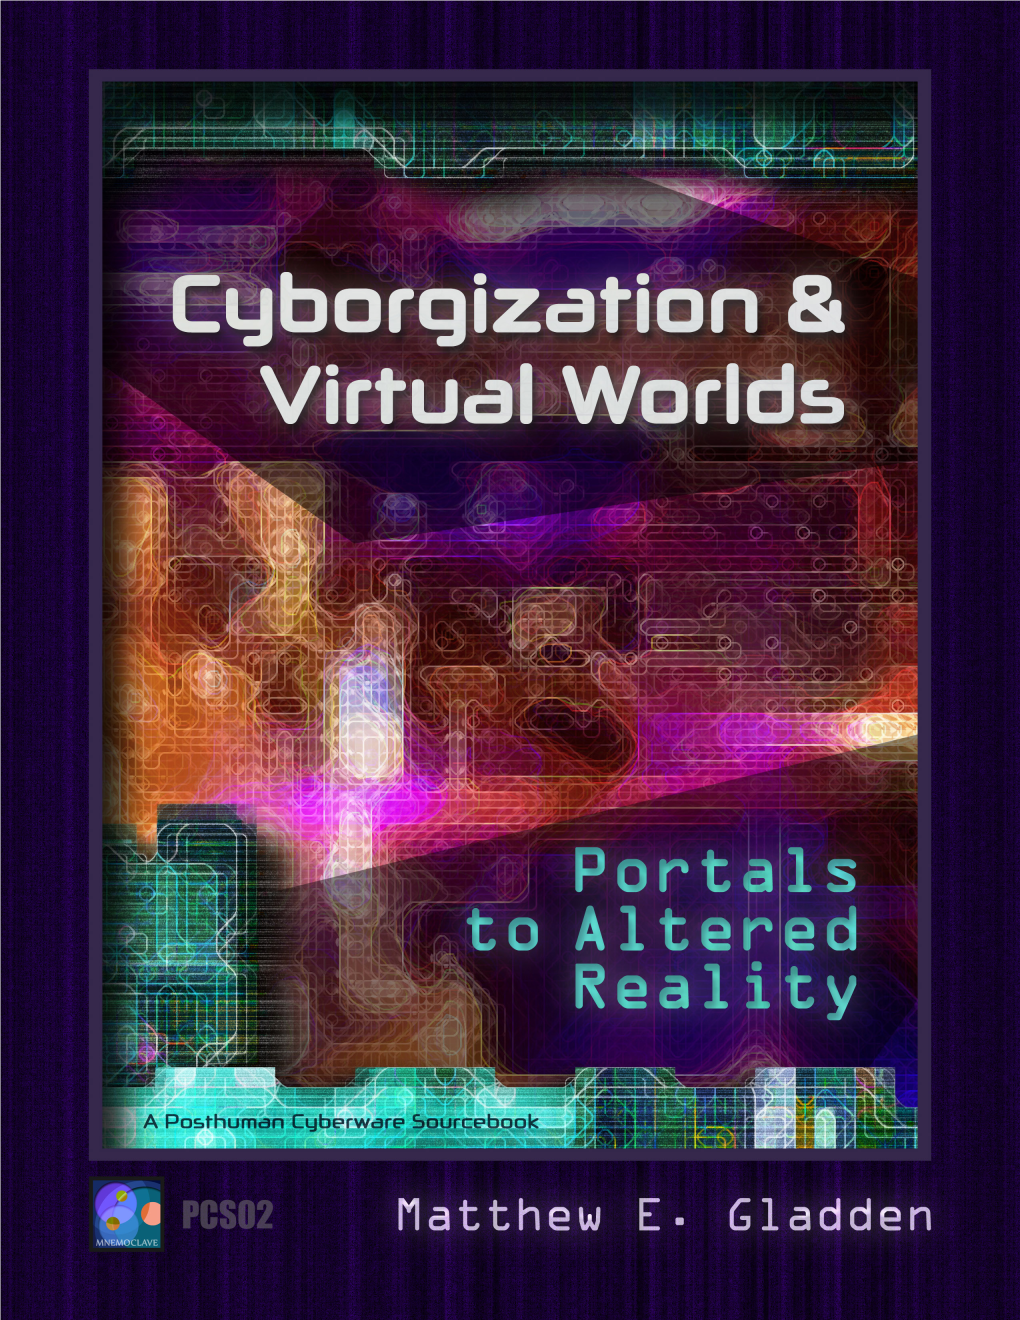 CYBORGIZATION and VIRTUAL WORLDS: a Character’S Body Is the Means by Which She Perceives Portals to Altered Reality and Interacts with Her Environment